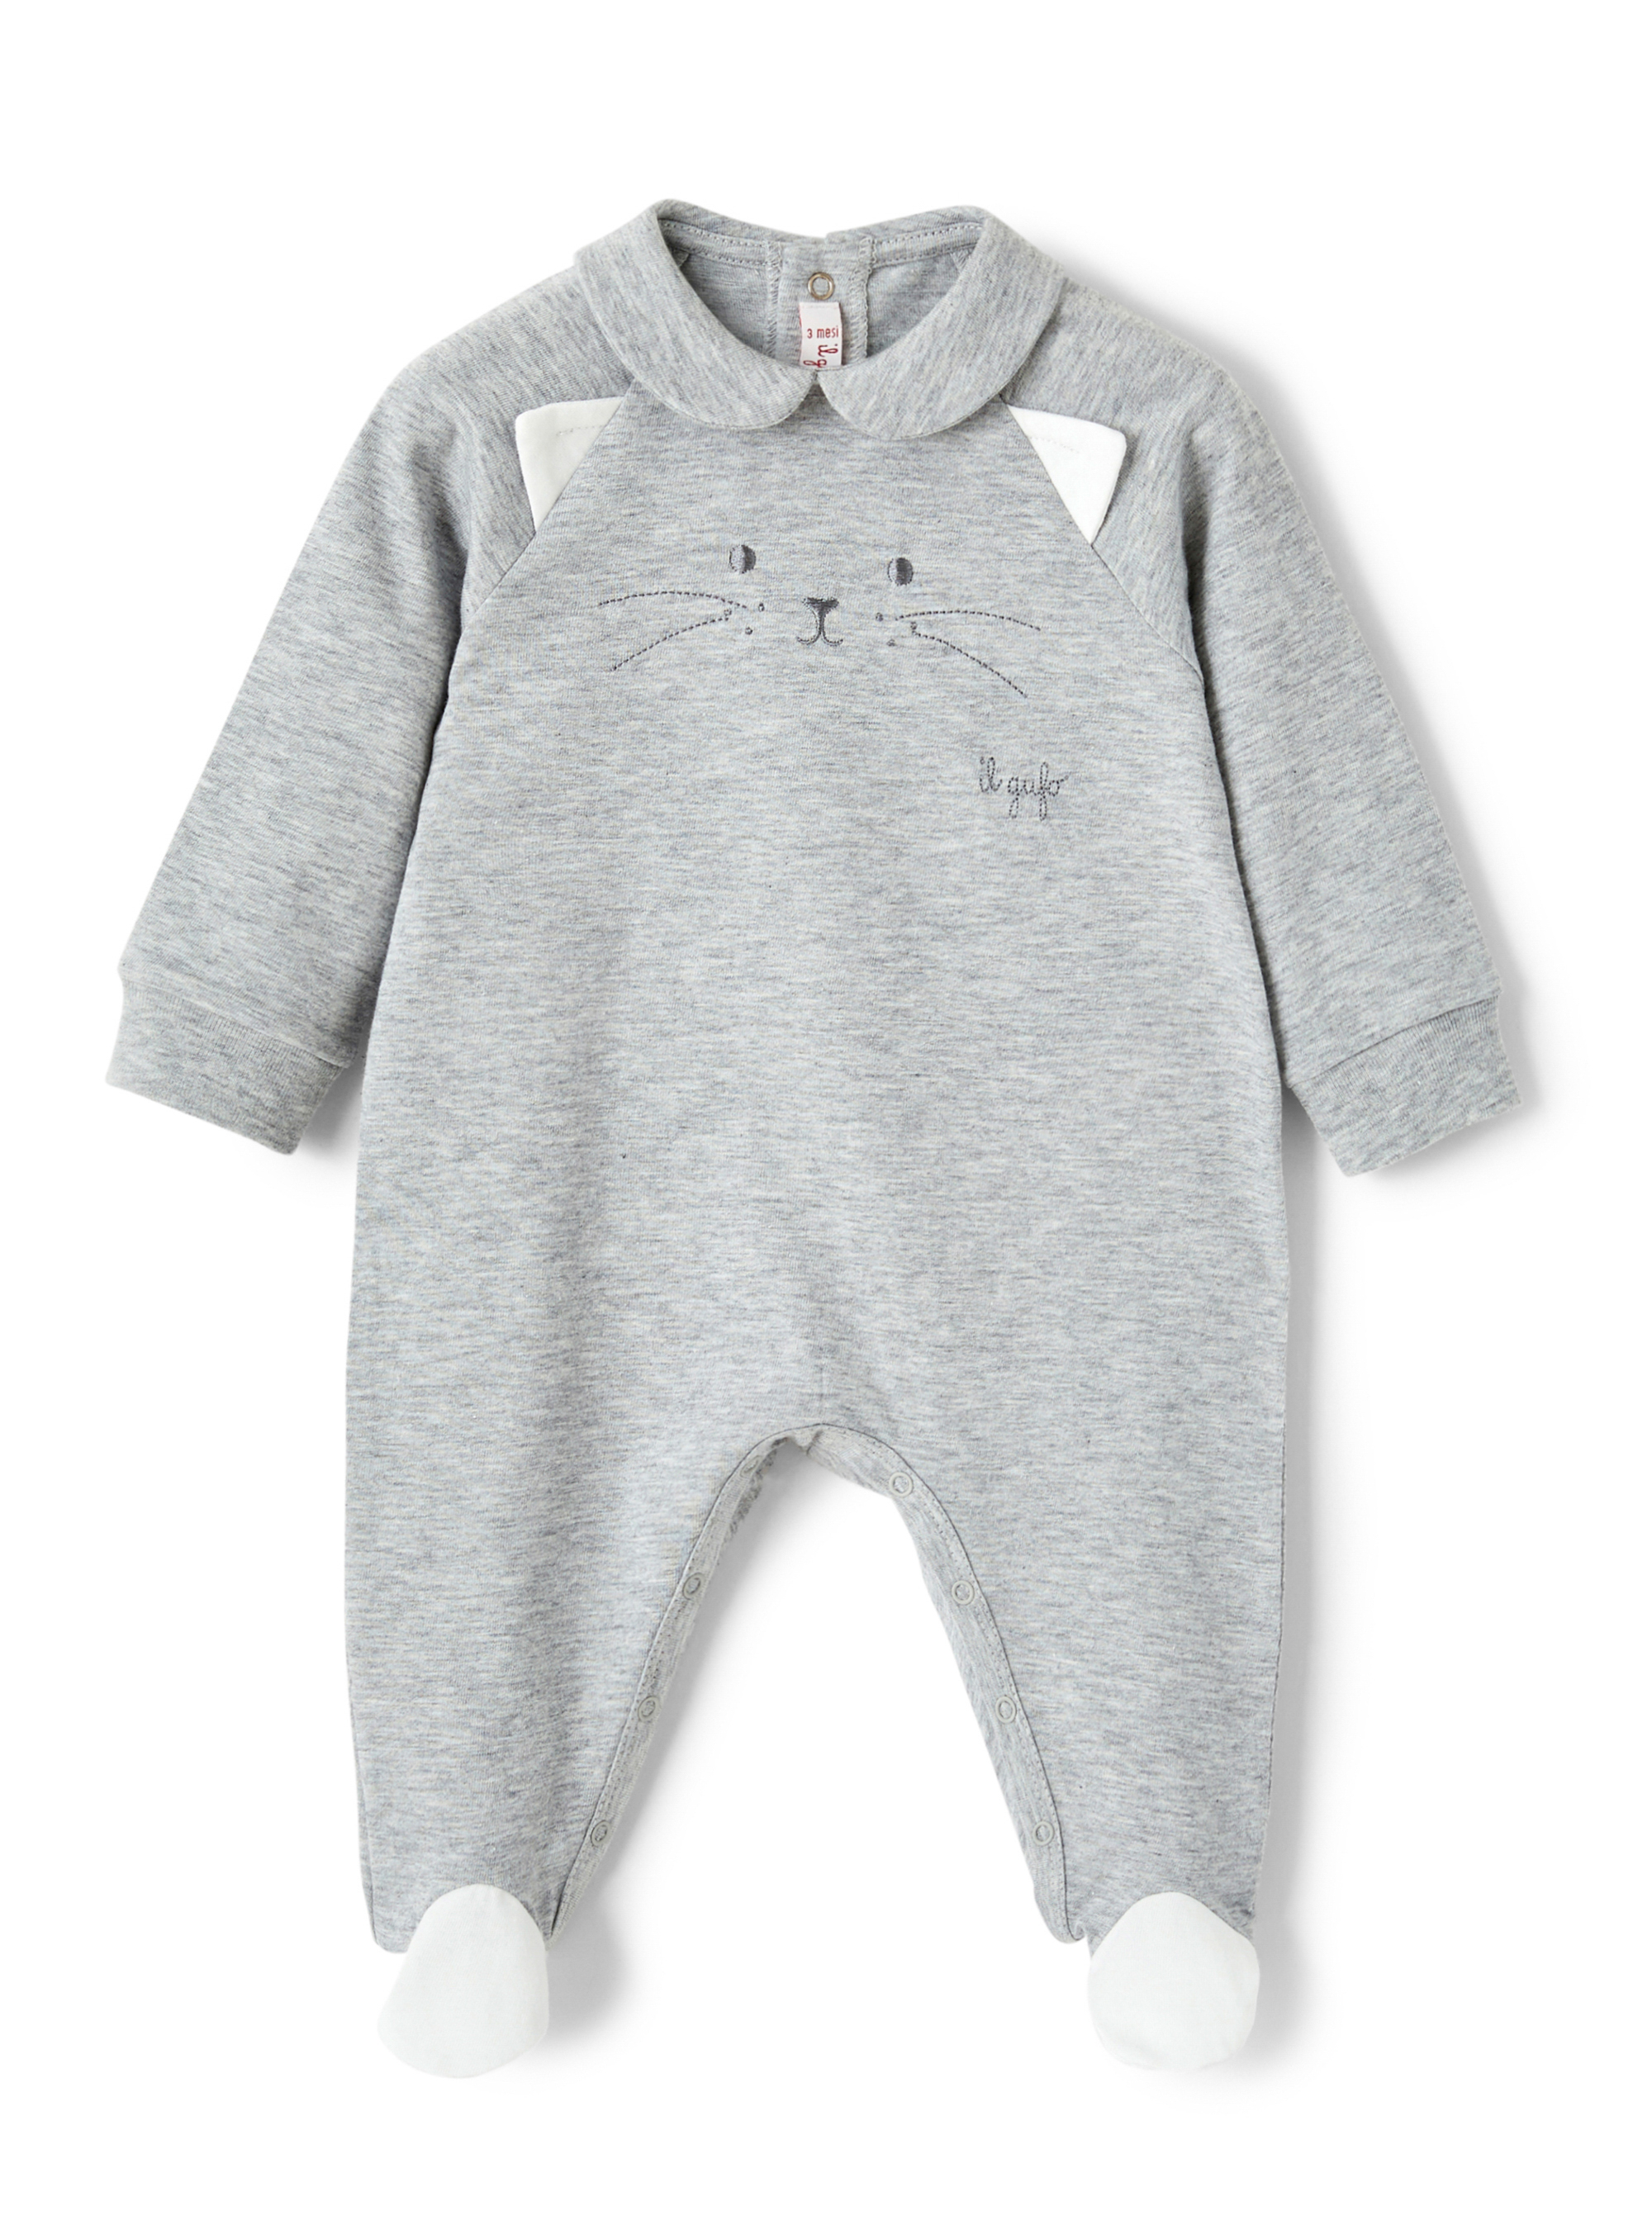 Grey onesie with cat face - Babygrows - Il Gufo